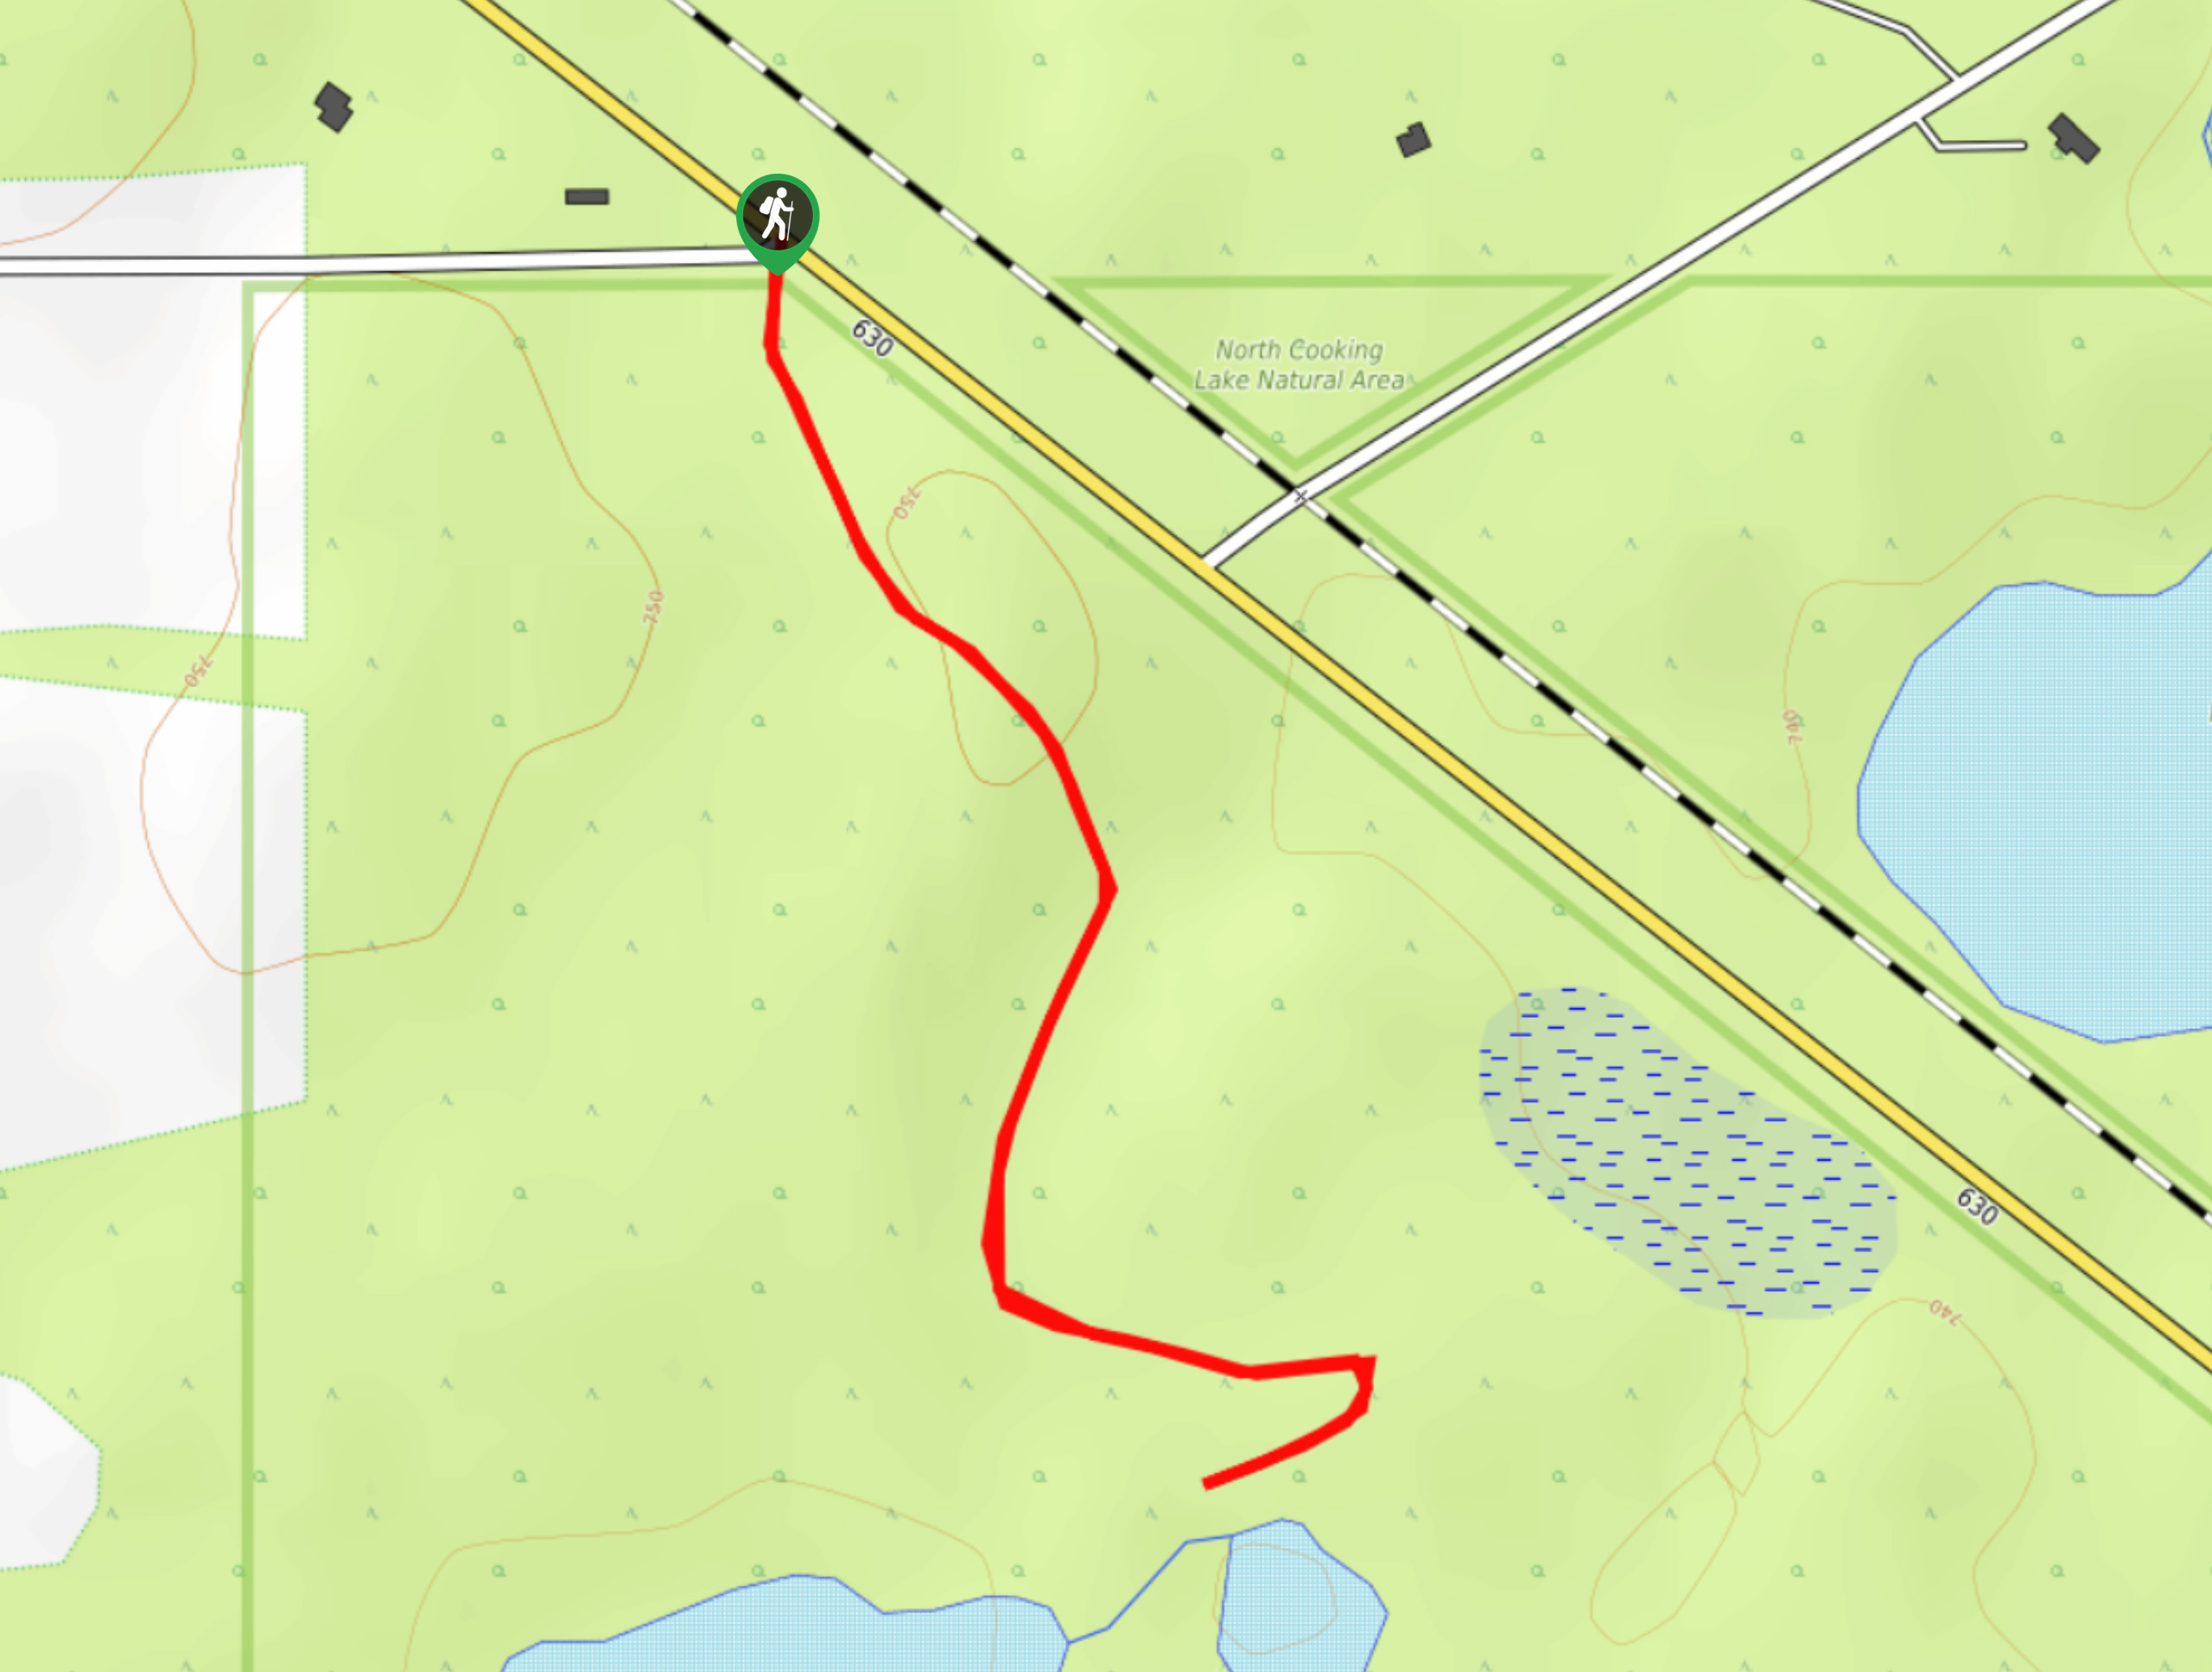 North Cooking Lake Trail Map